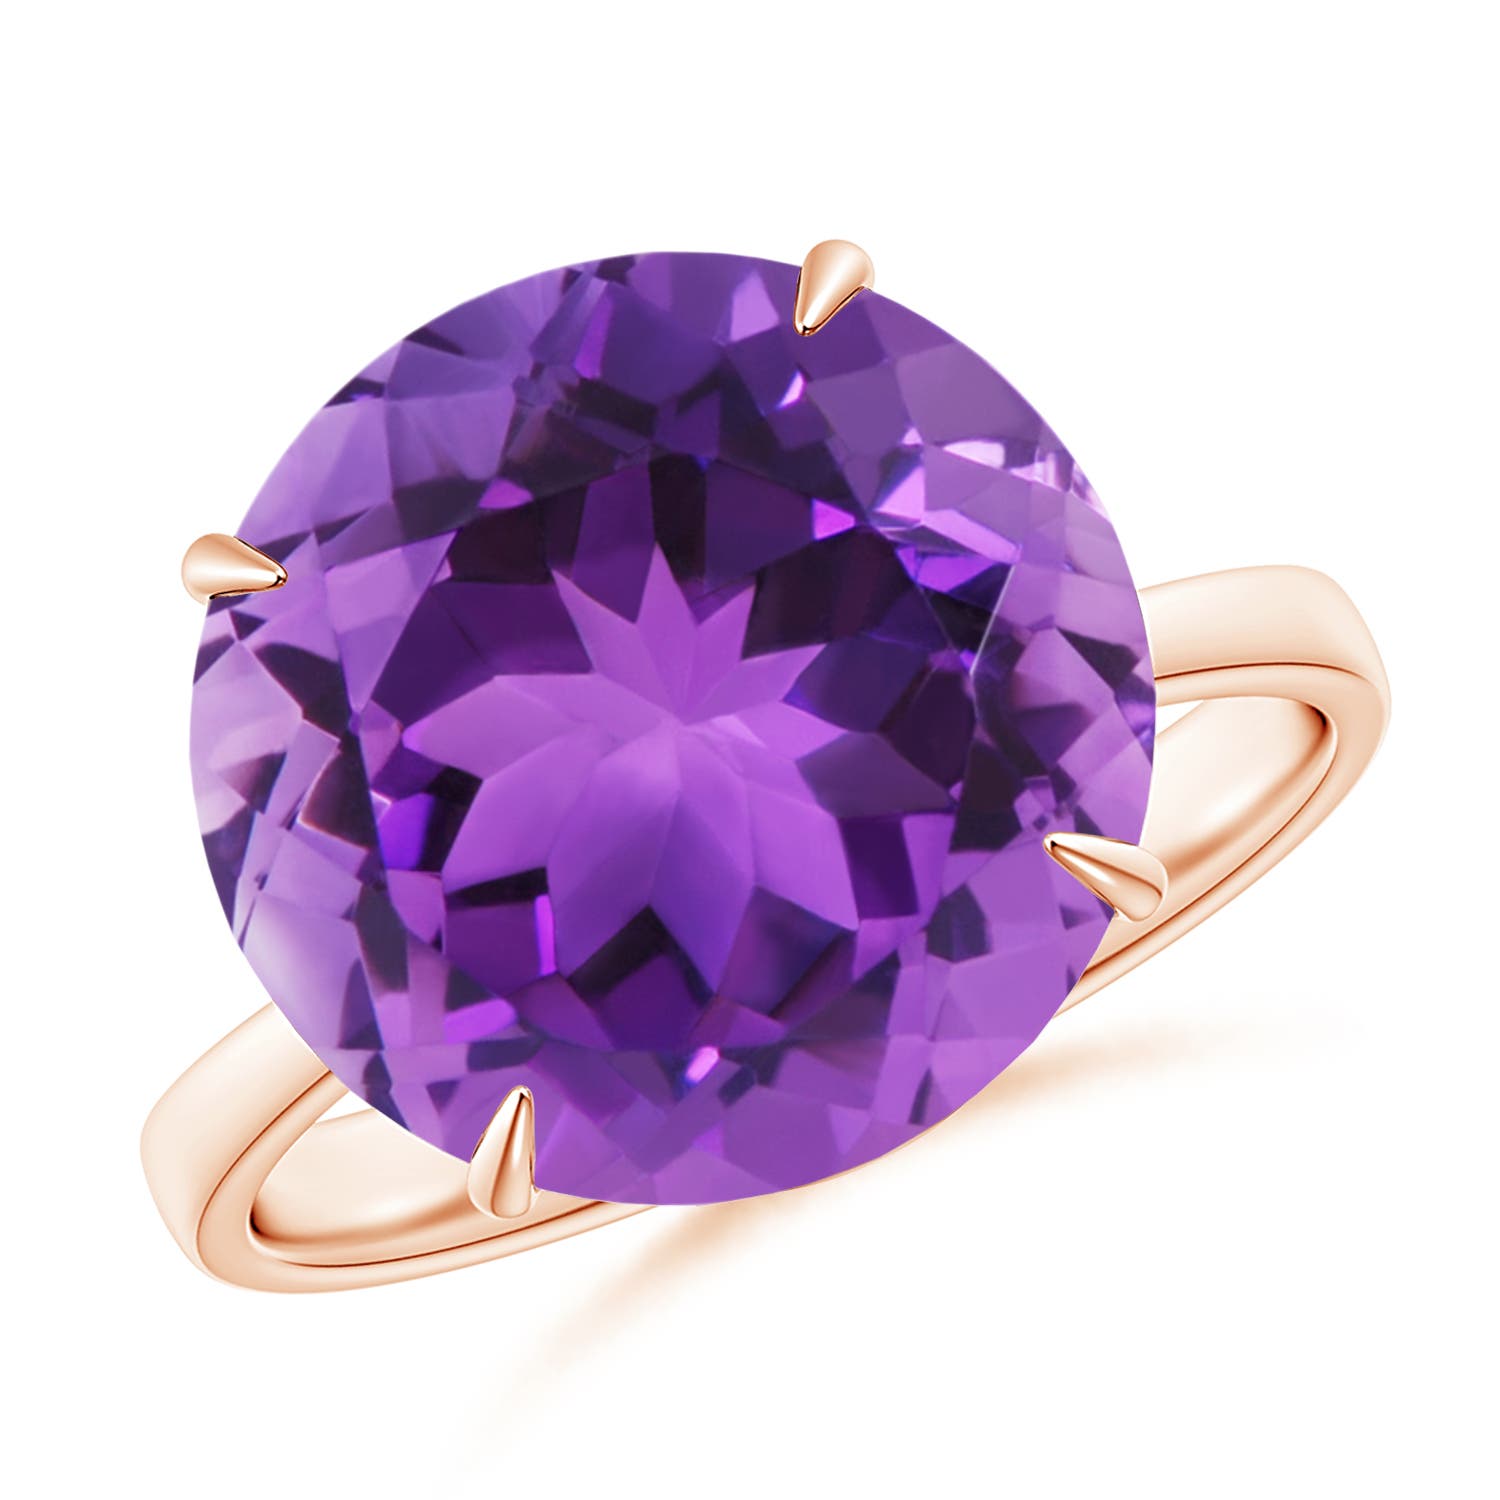 AAA- Amethyst / 7.2 CT / 14 KT Rose Gold